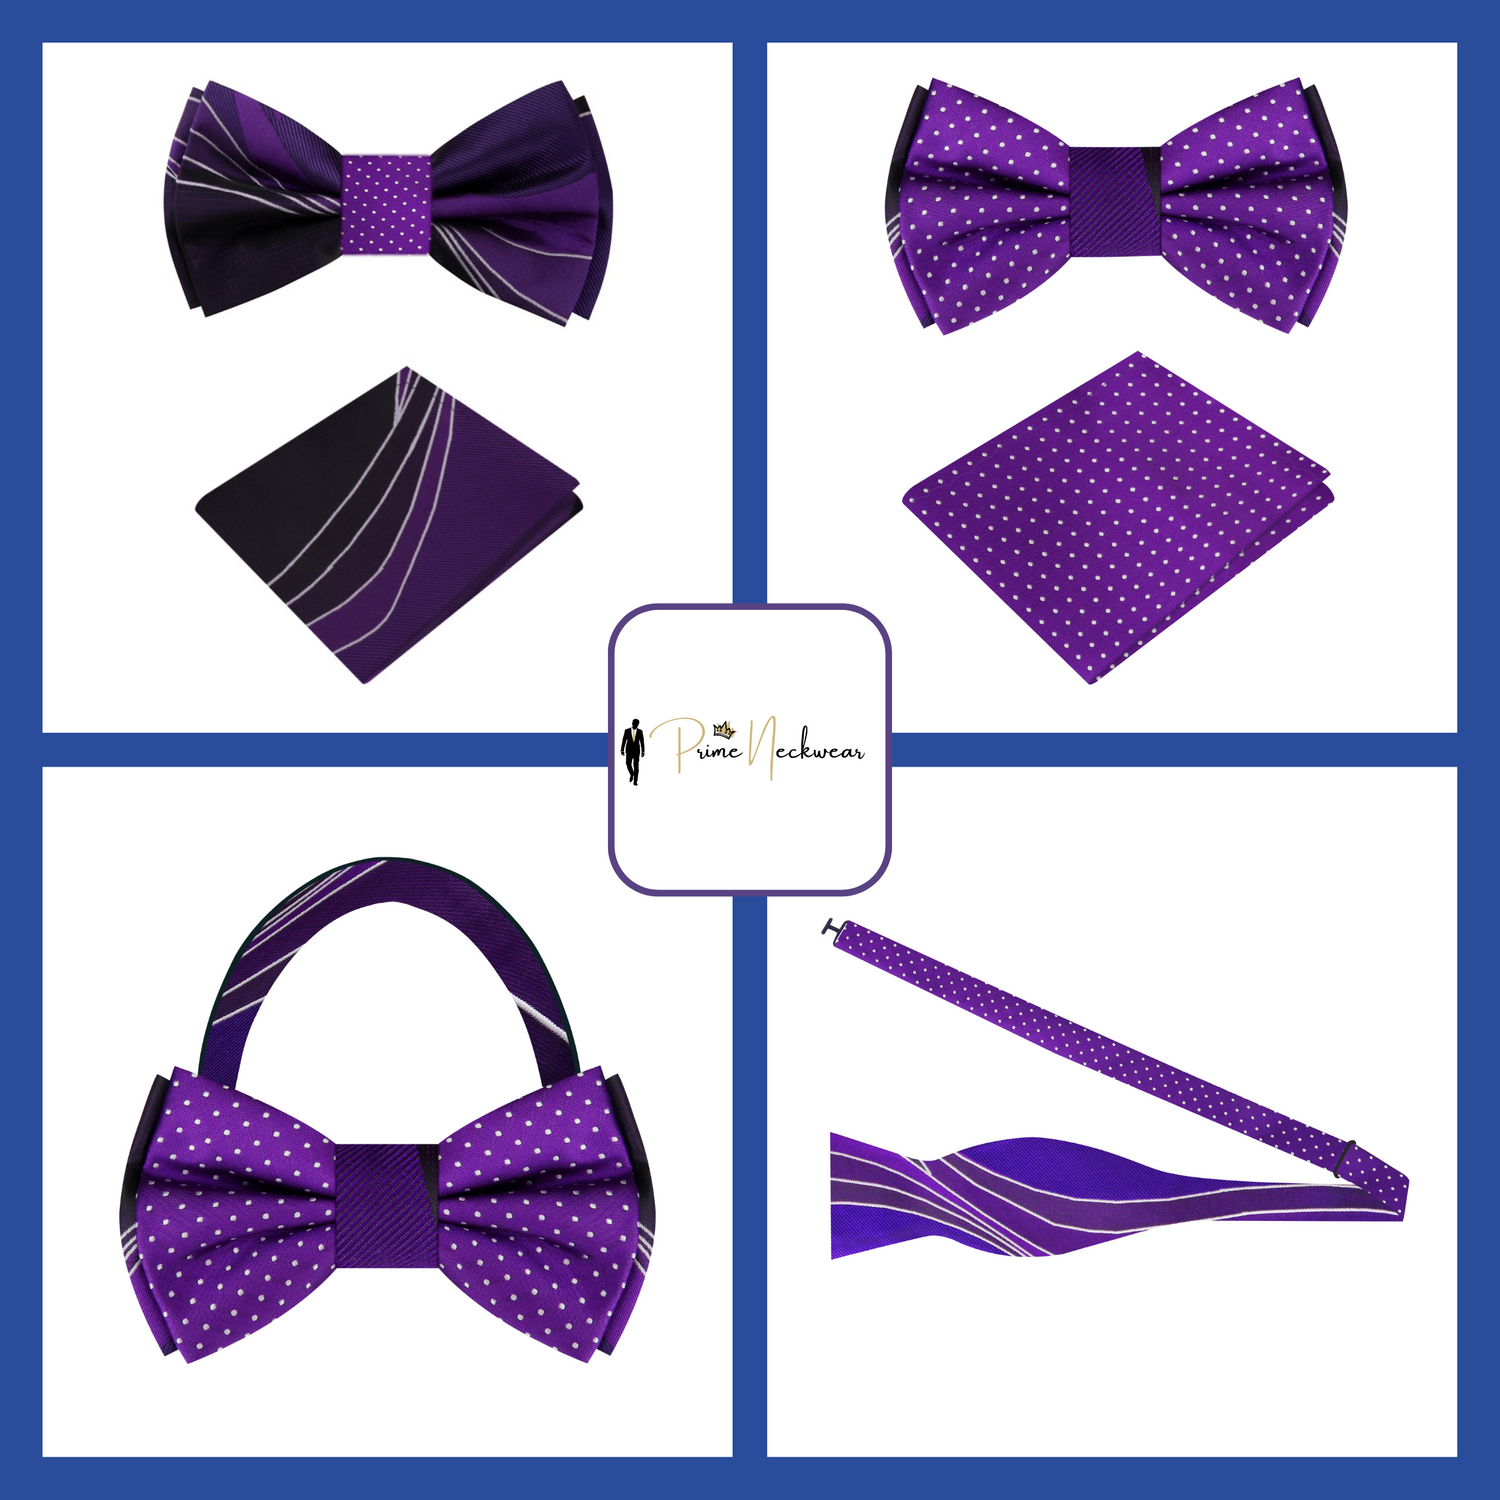 A picture of the double sided purple bow tie in four views